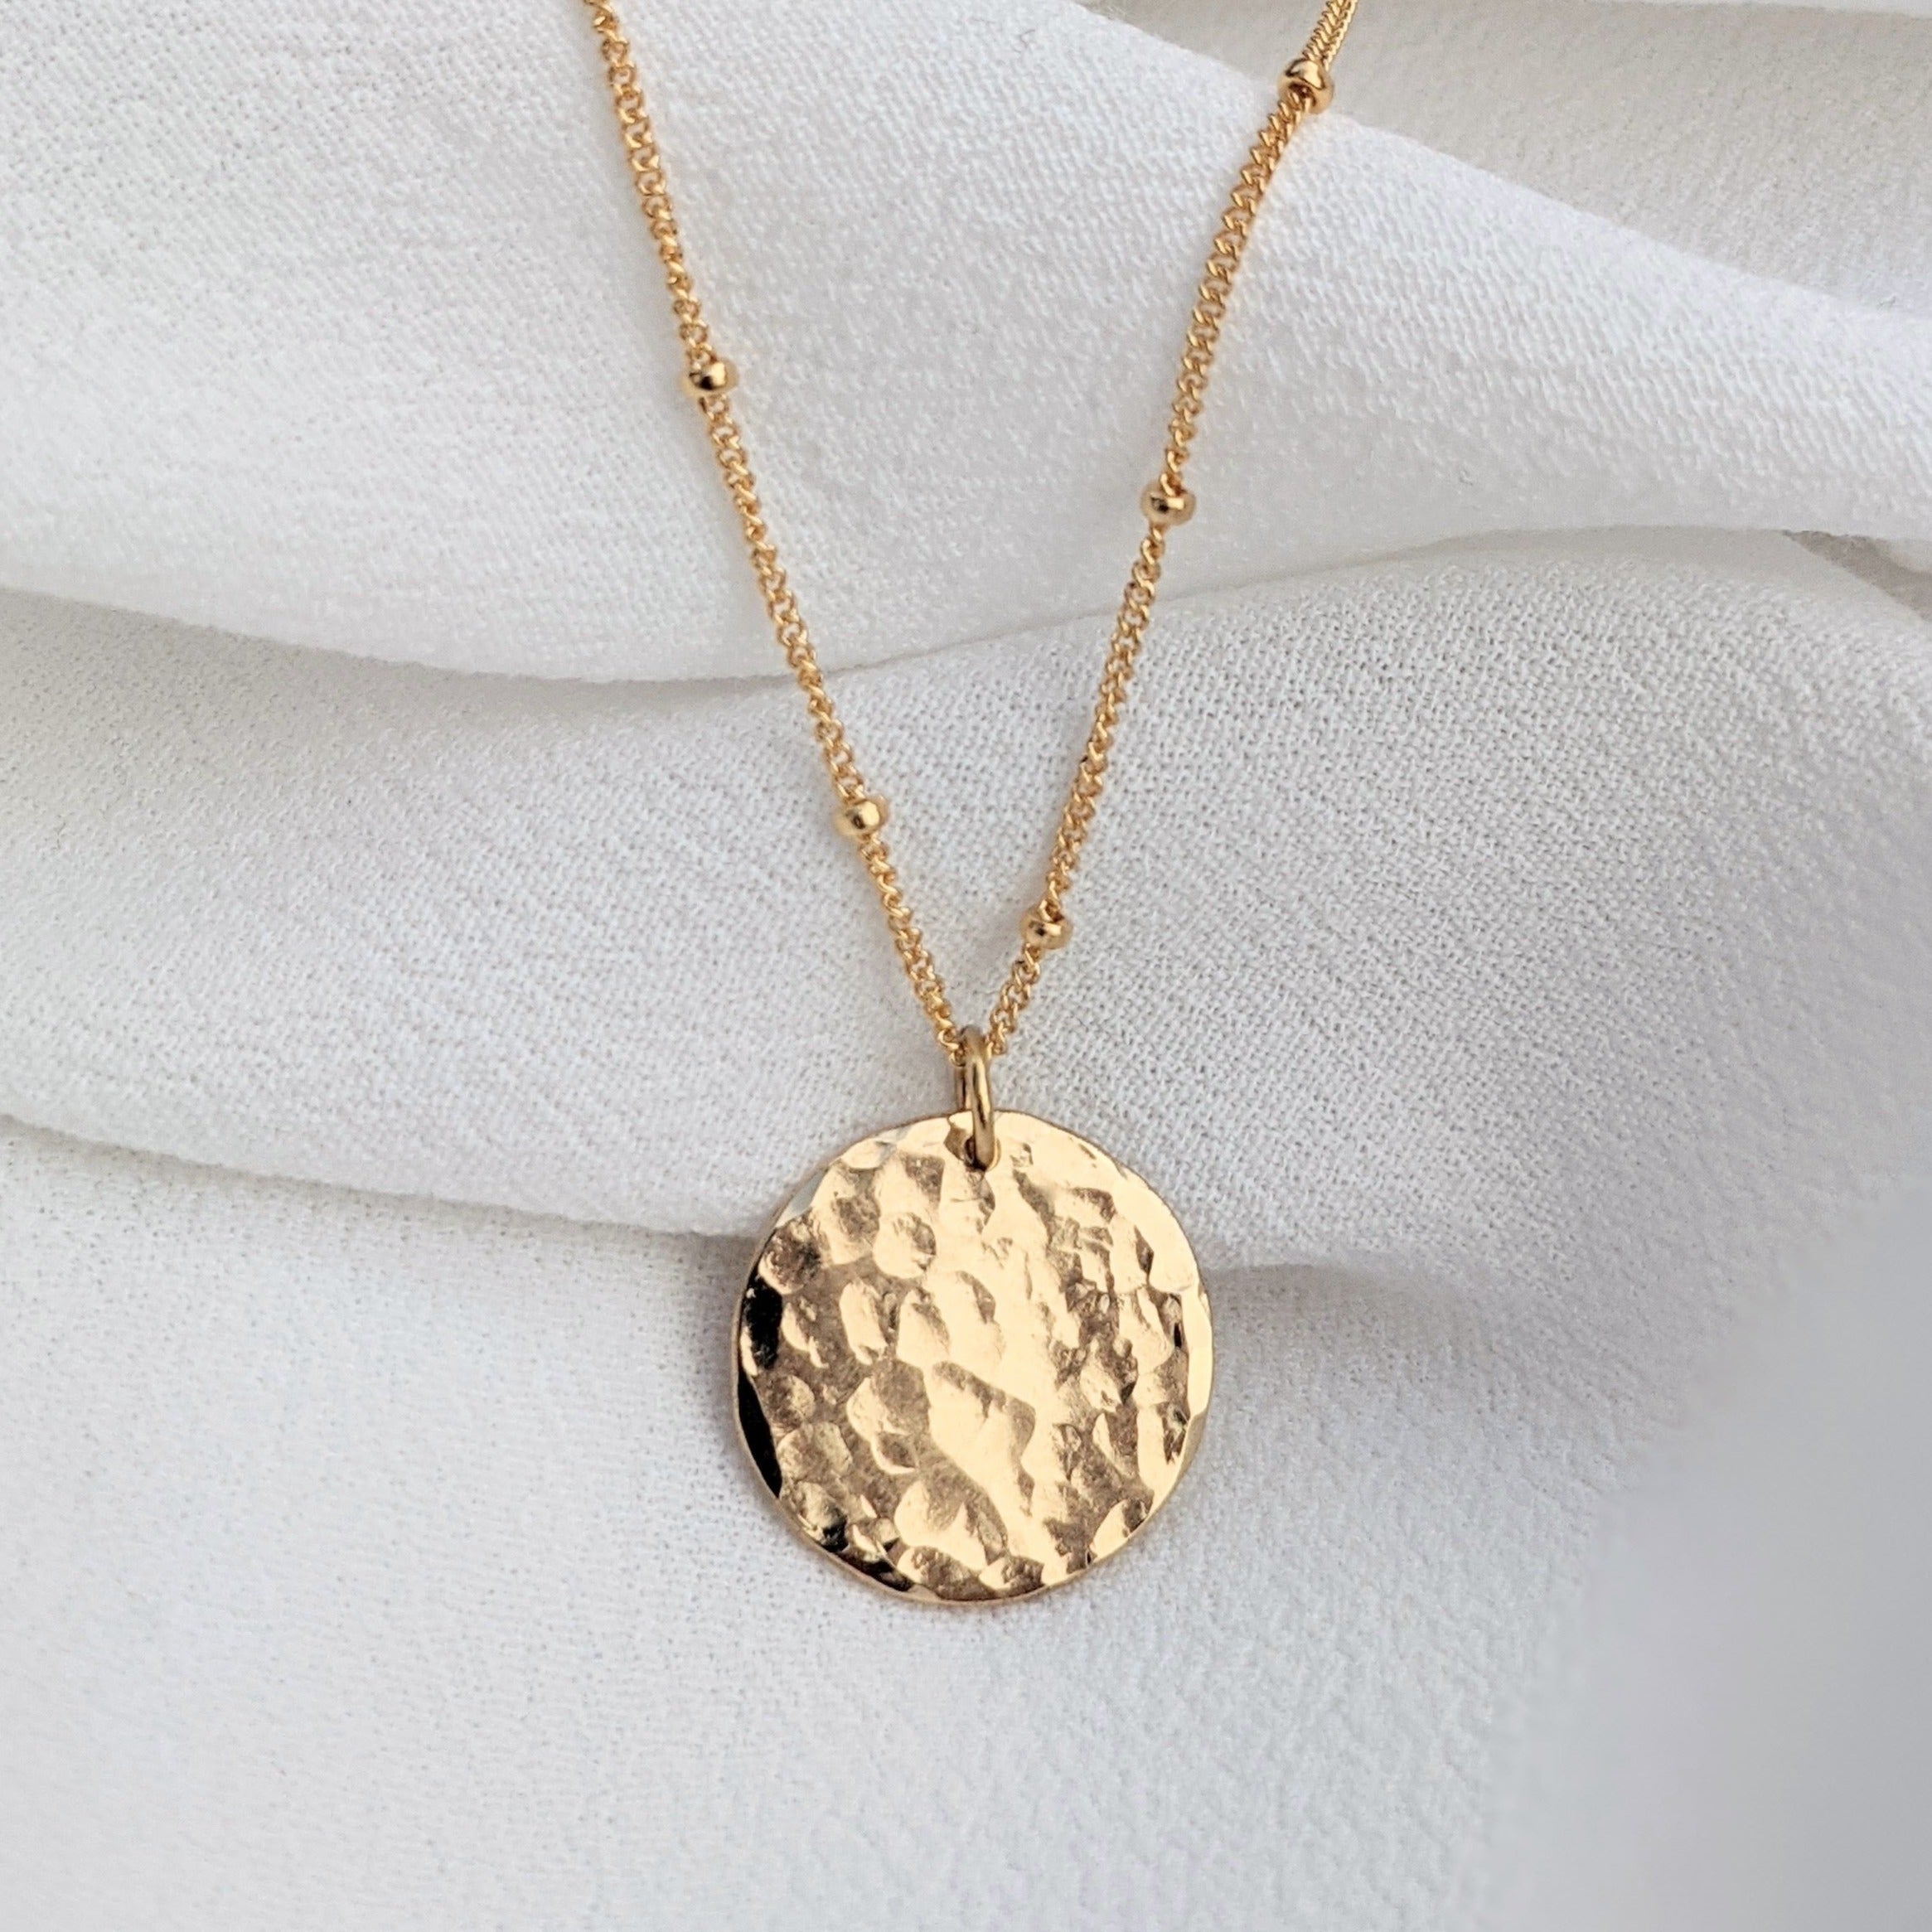 Small gold filled hammered disc pendant necklace on satellite chain